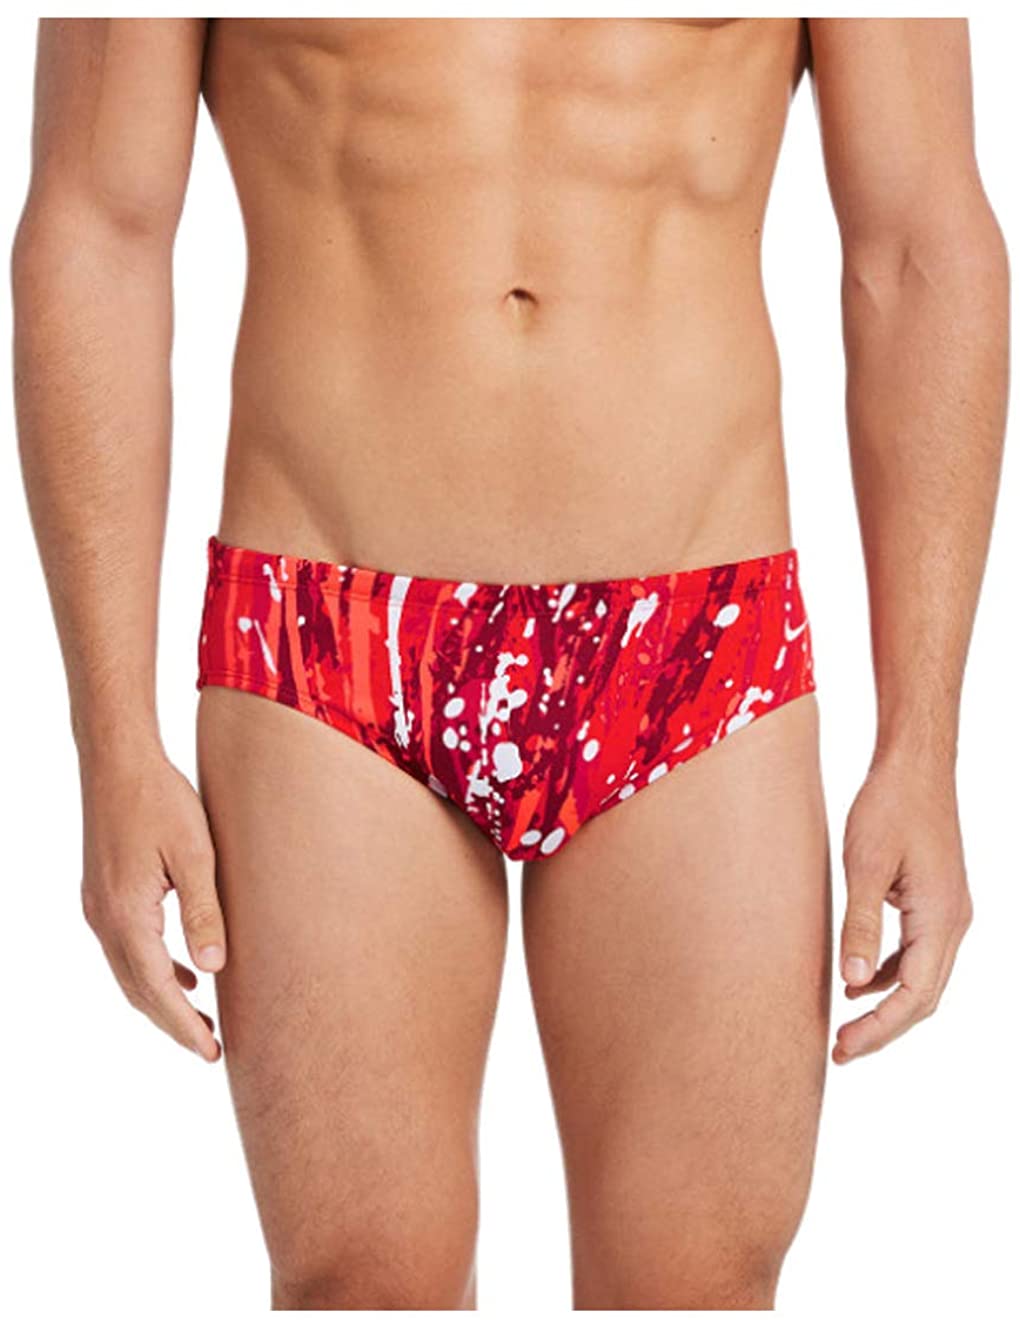 Nike Swim Men's Brief in University Red color from the front